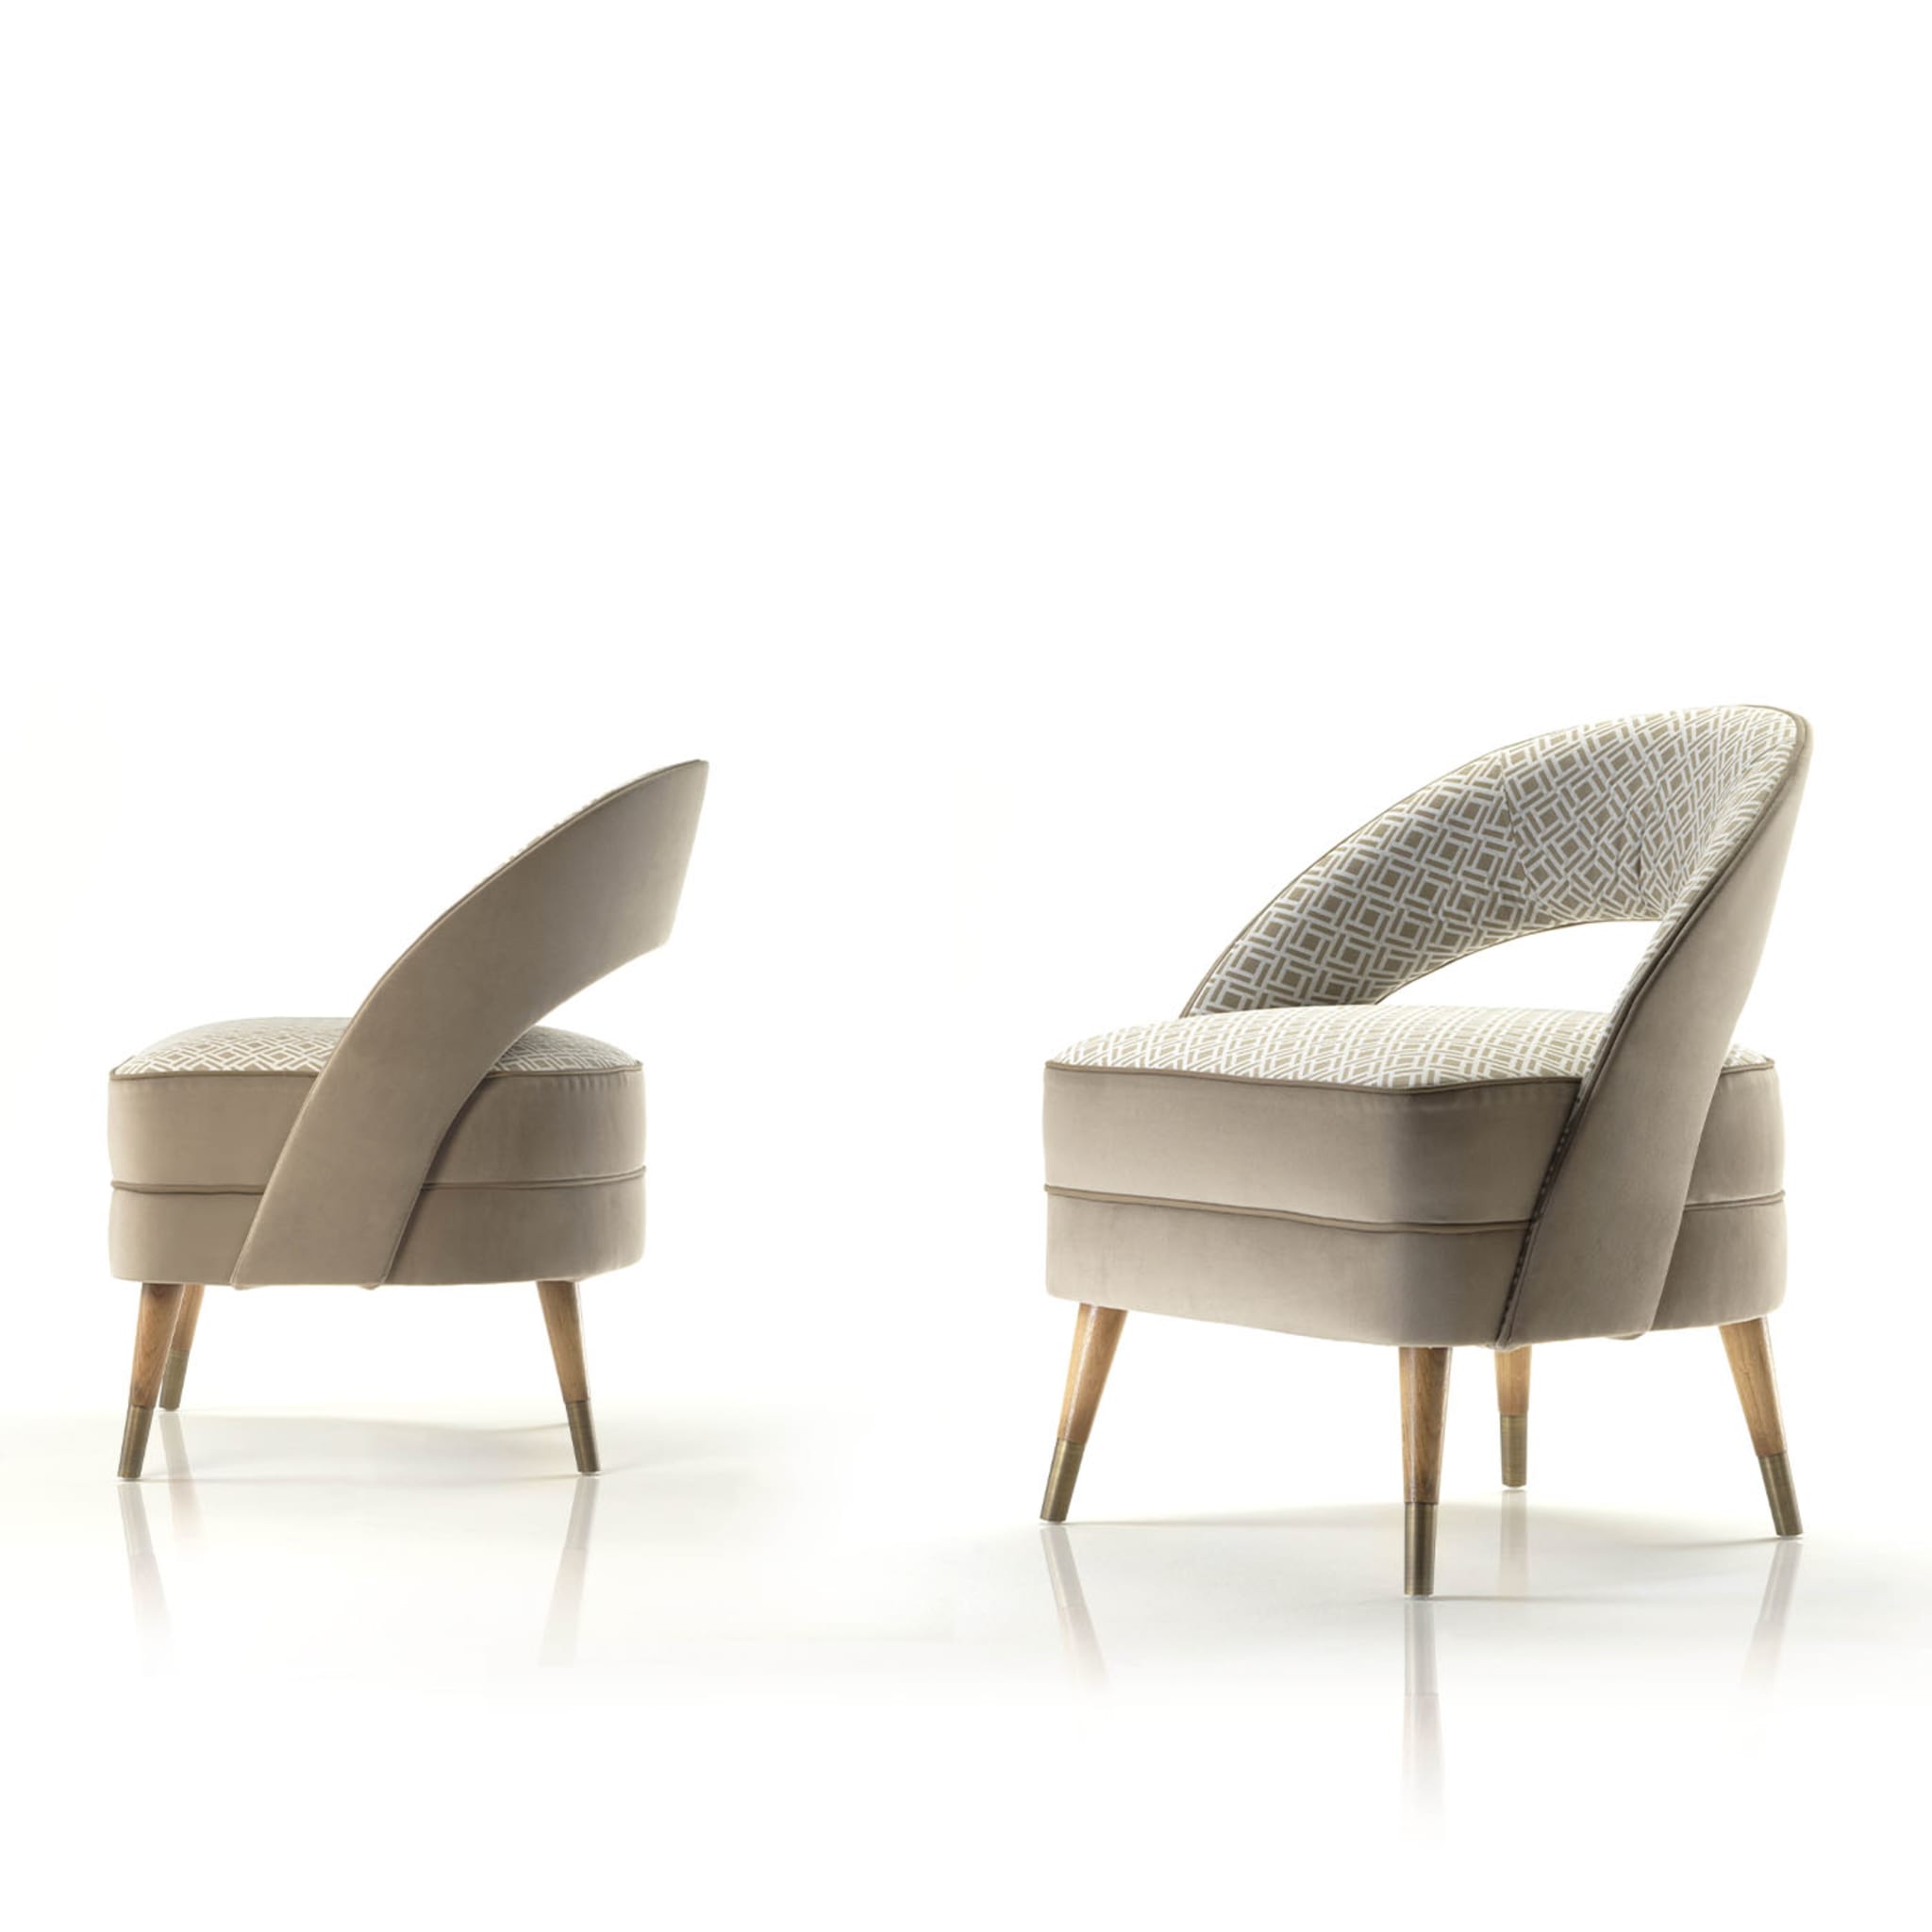 Olimpia Geometric-Patterned Taupe Armchair  - Alternative view 1